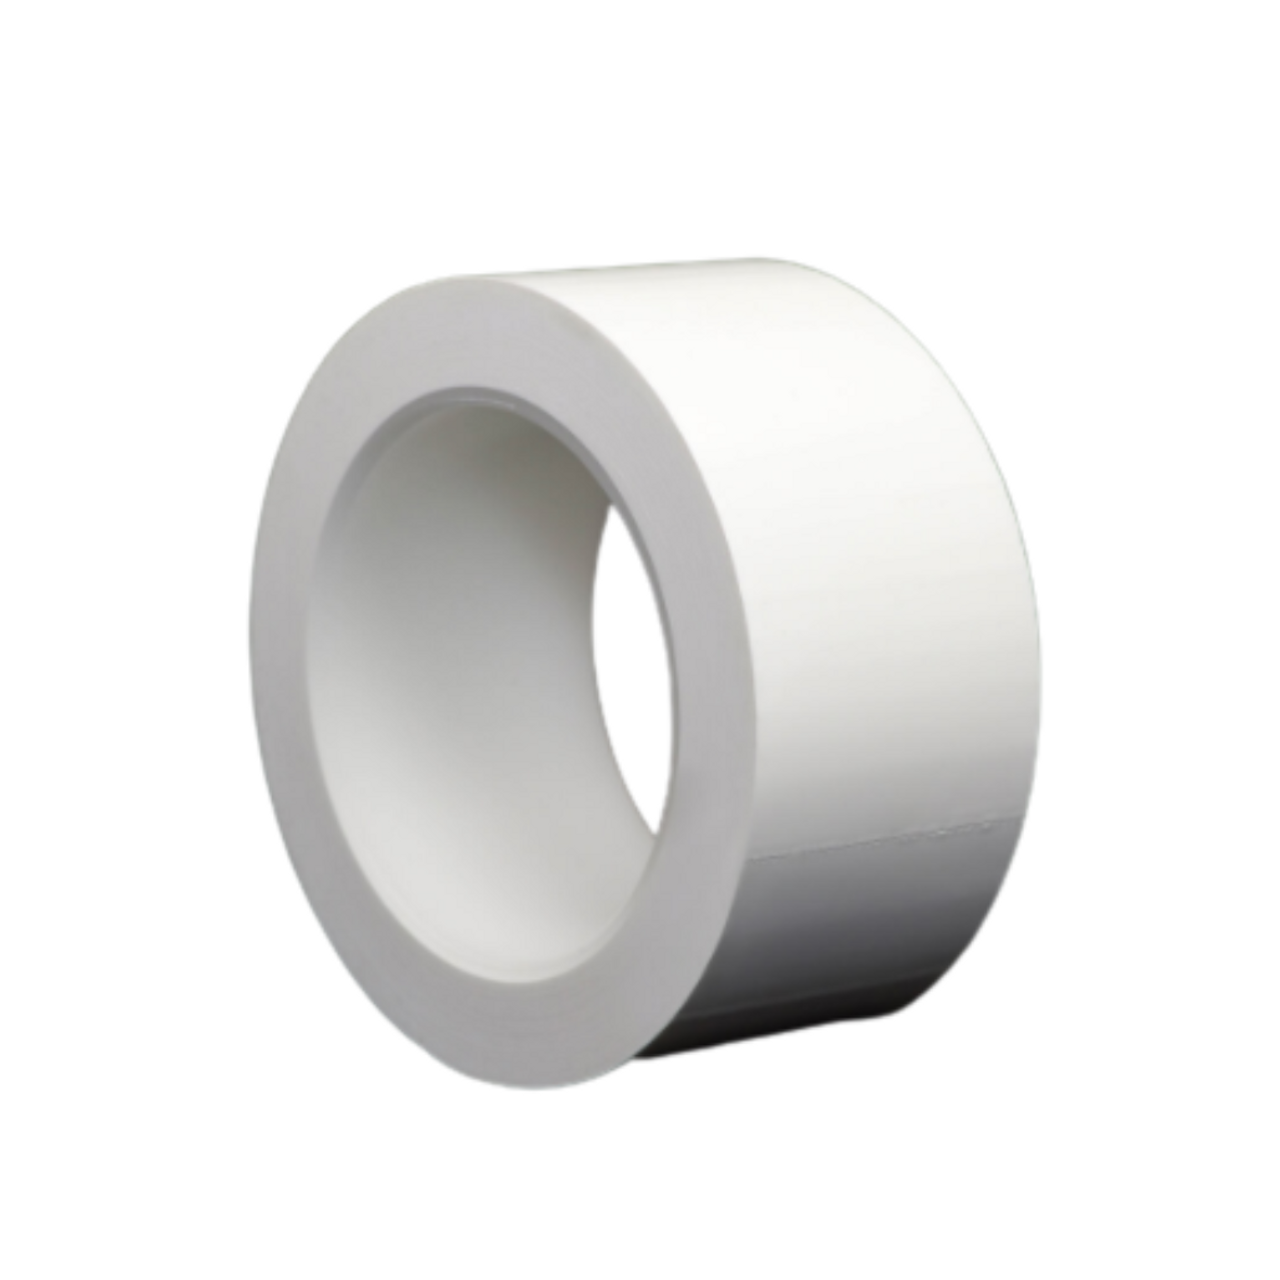 Medium Adhesion Cleanroom Vinyl Tape, Adhesive Tape & Labels for Critical  Environments